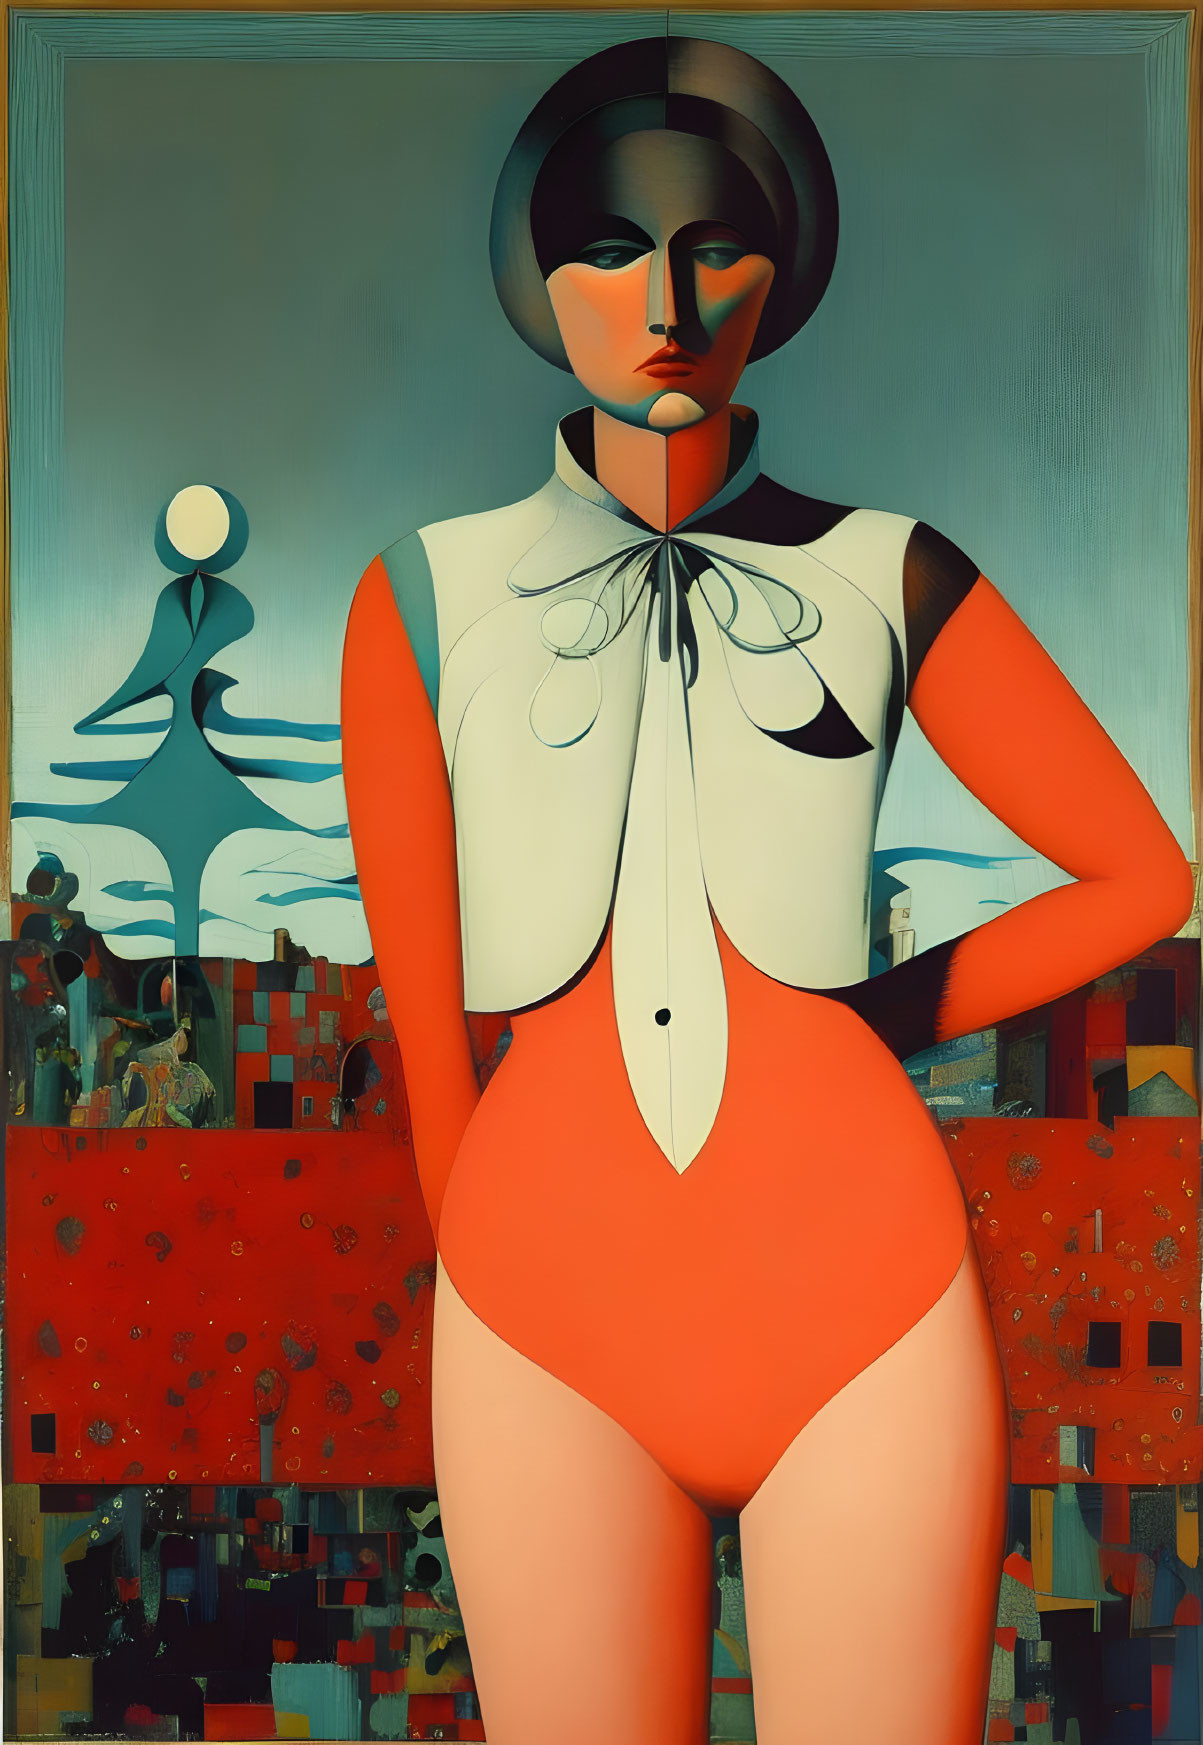 Surrealist painting with androgynous figure in red bodysuit on colorful background